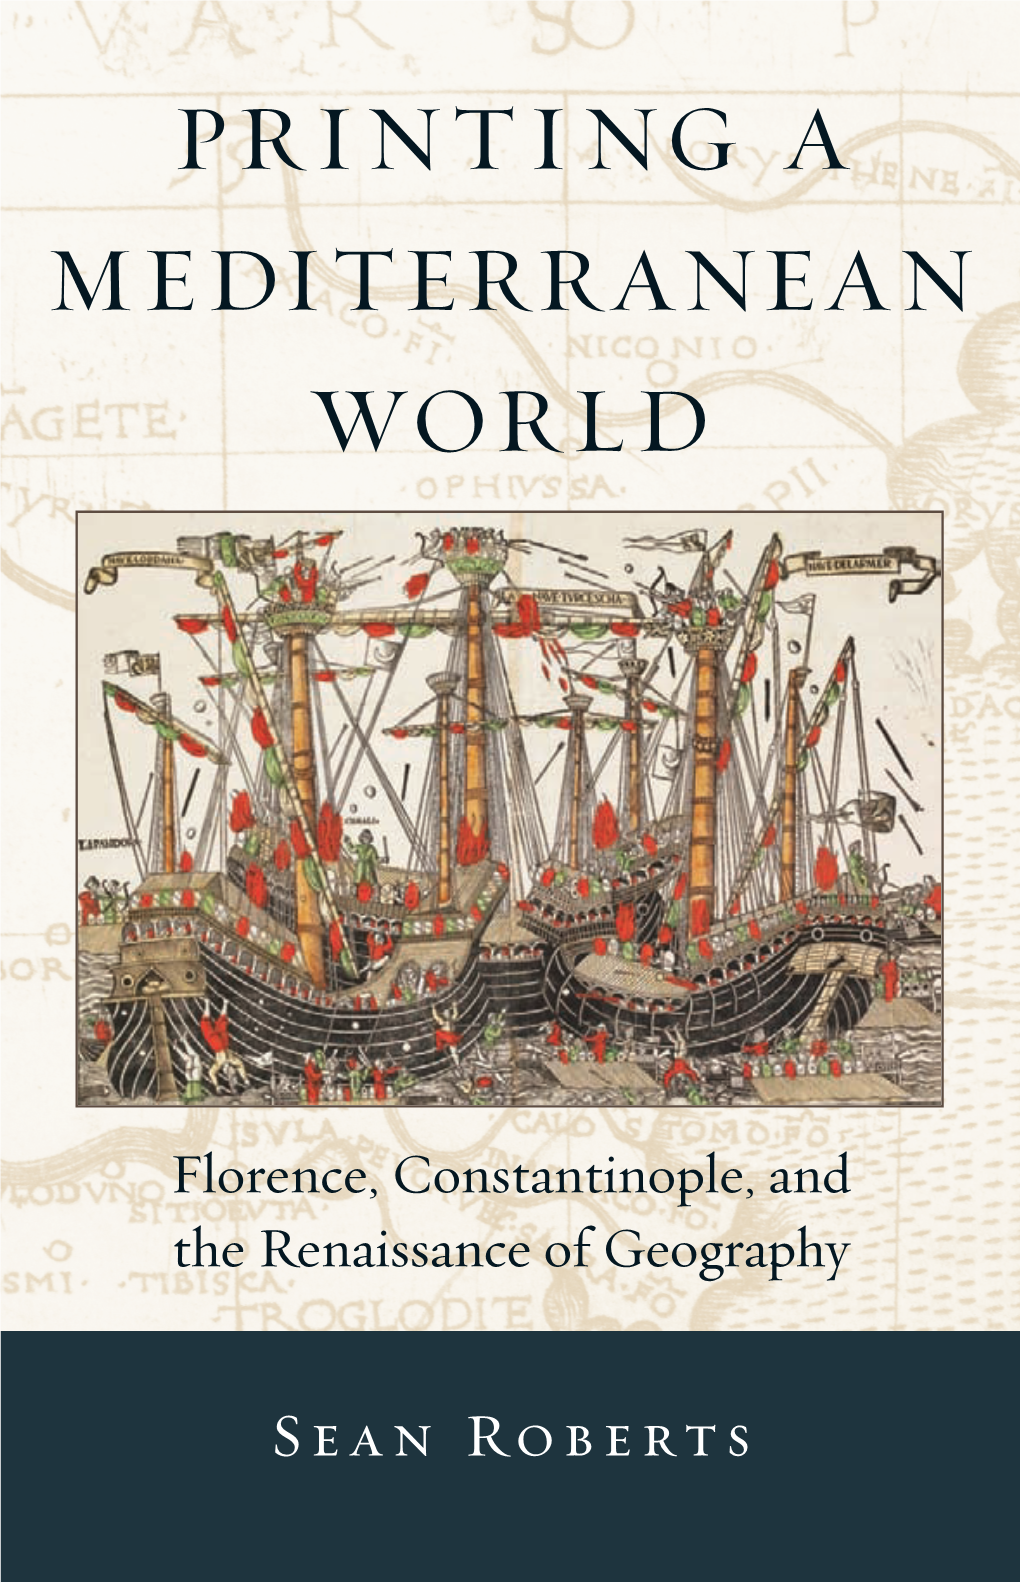 Florence, Constantinople, and the Renaissance of Geography